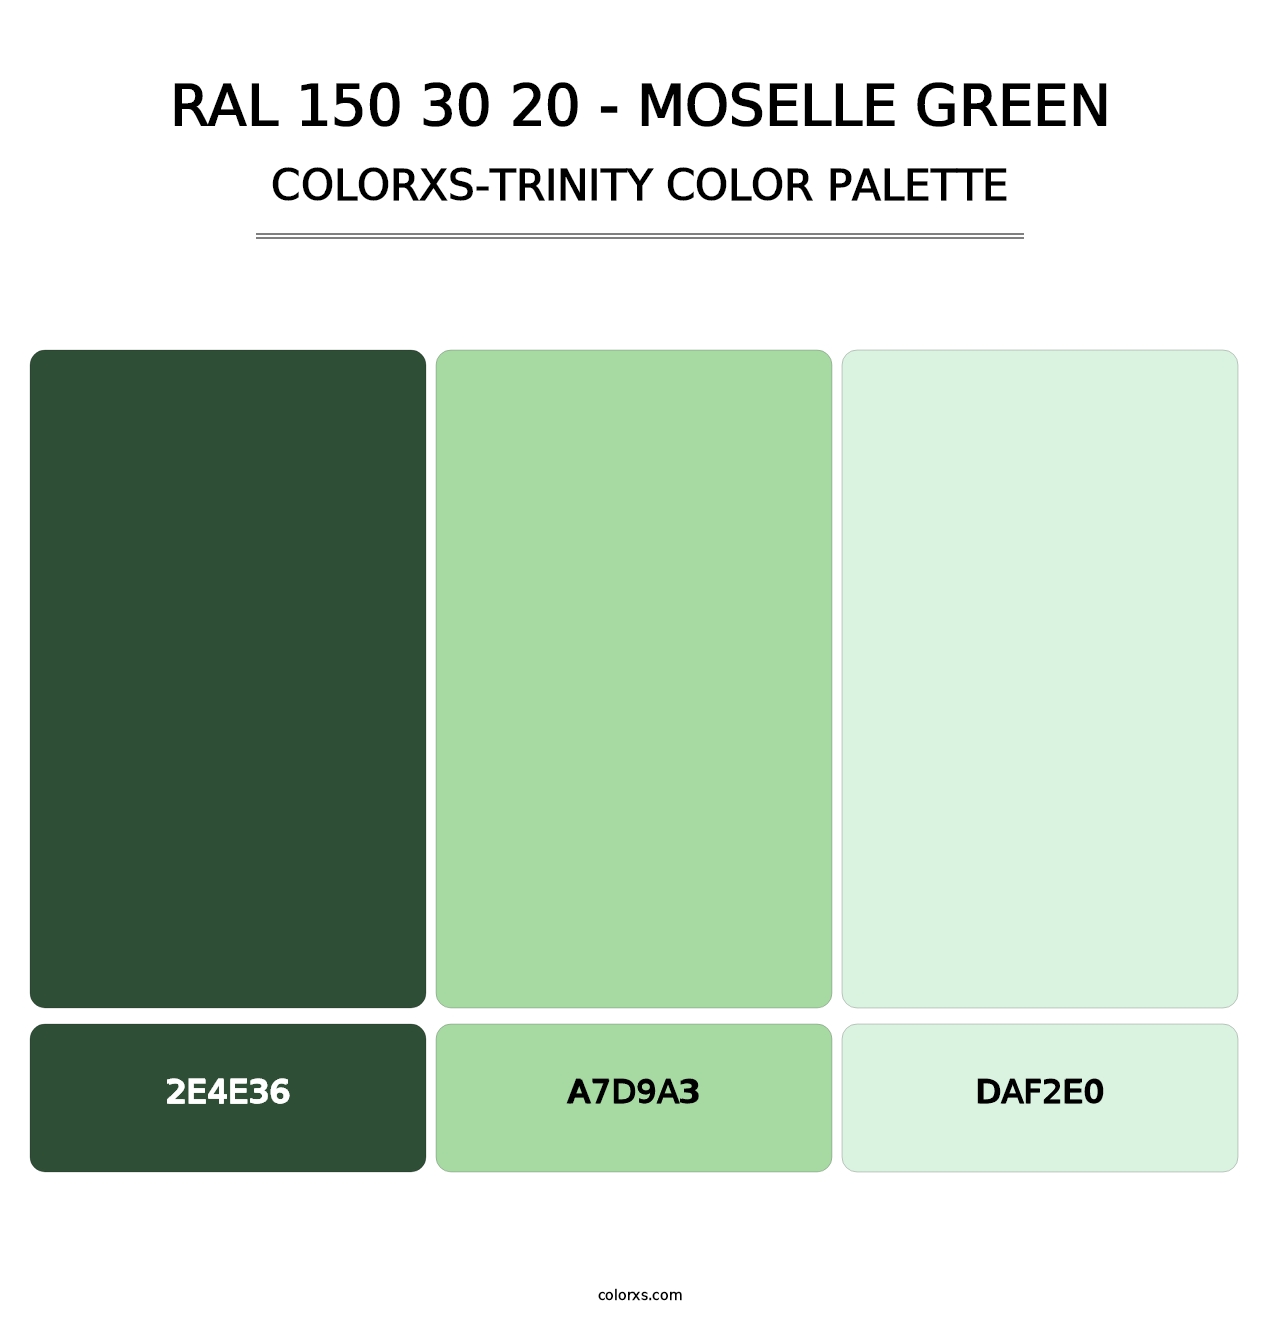 RAL 150 30 20 - Moselle Green - Colorxs Trinity Palette